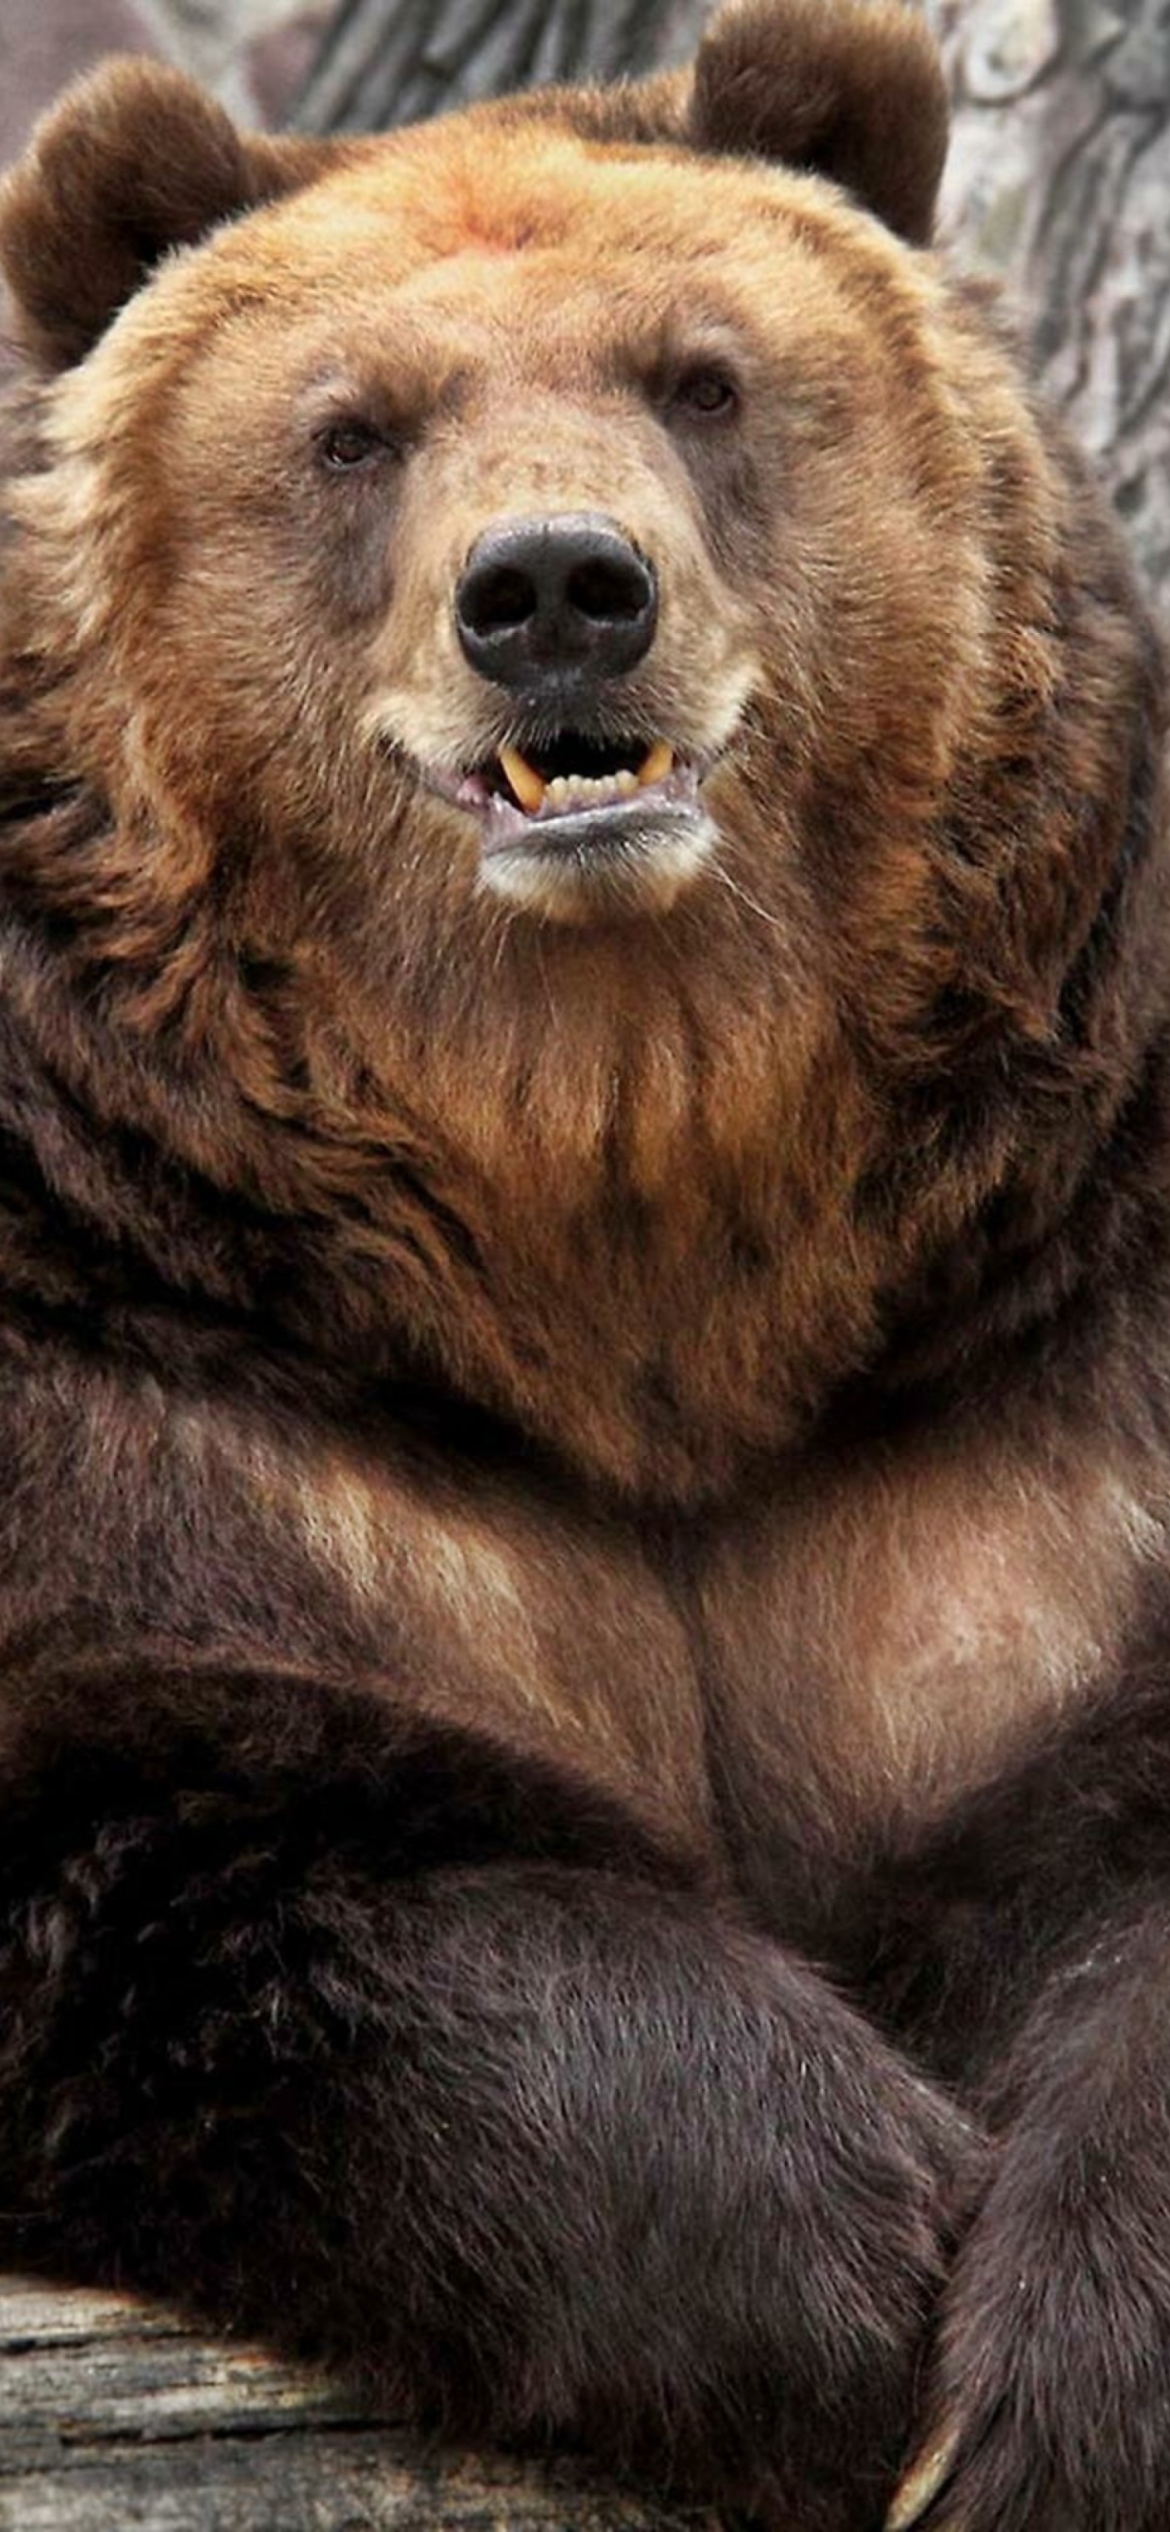 1080x1920 Grizzly Bear Wallpapers for IPhone 6S 7 8 Retina HD